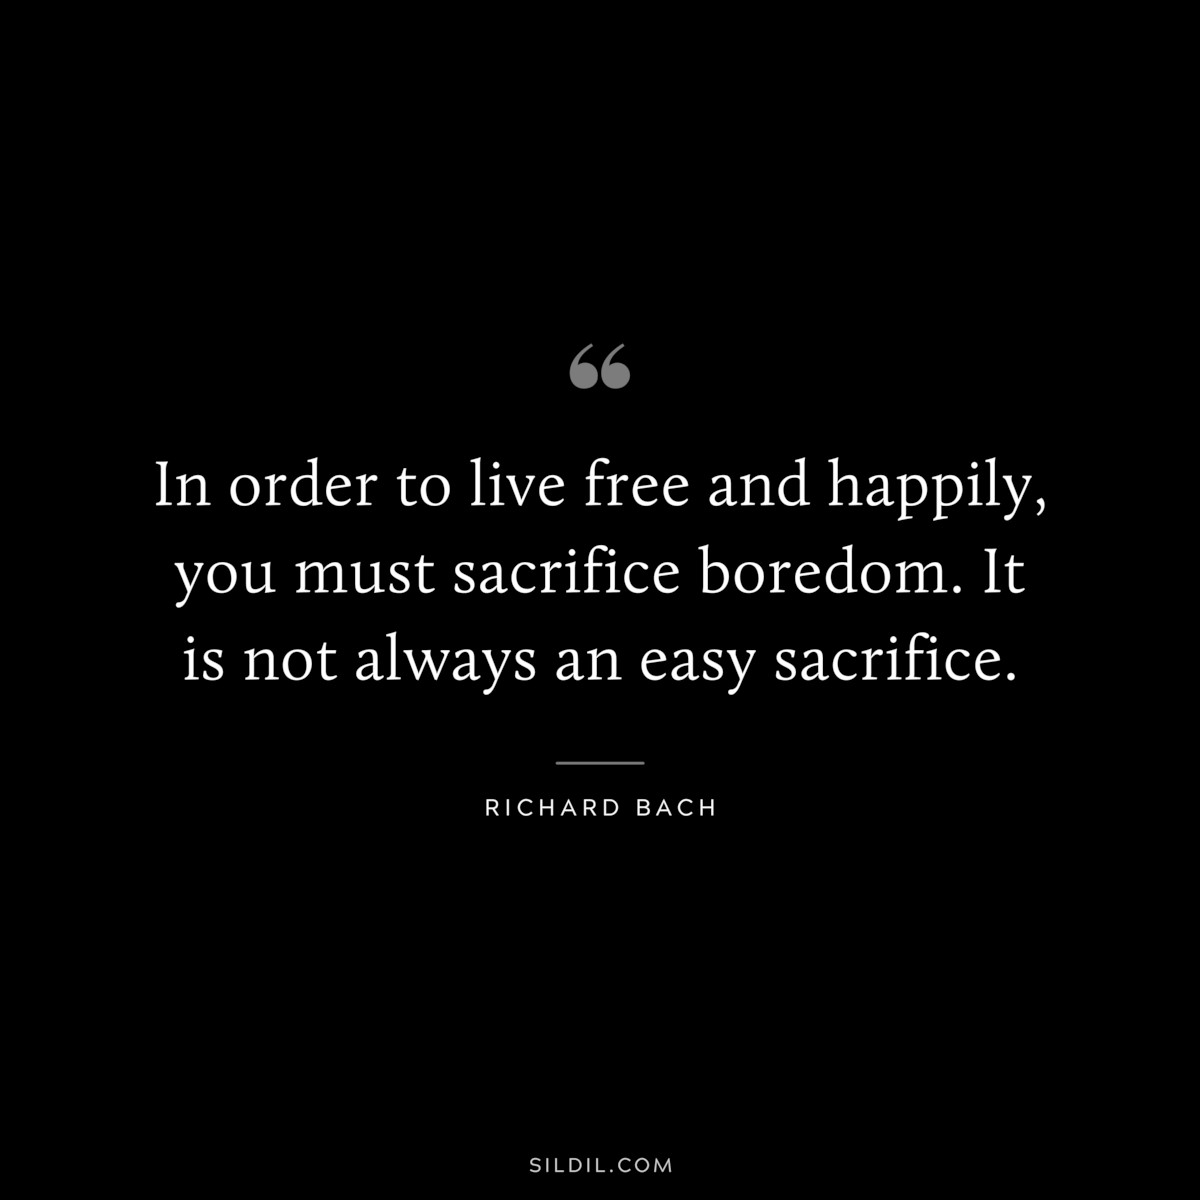 In order to live free and happily, you must sacrifice boredom. It is not always an easy sacrifice. ― Richard Bach